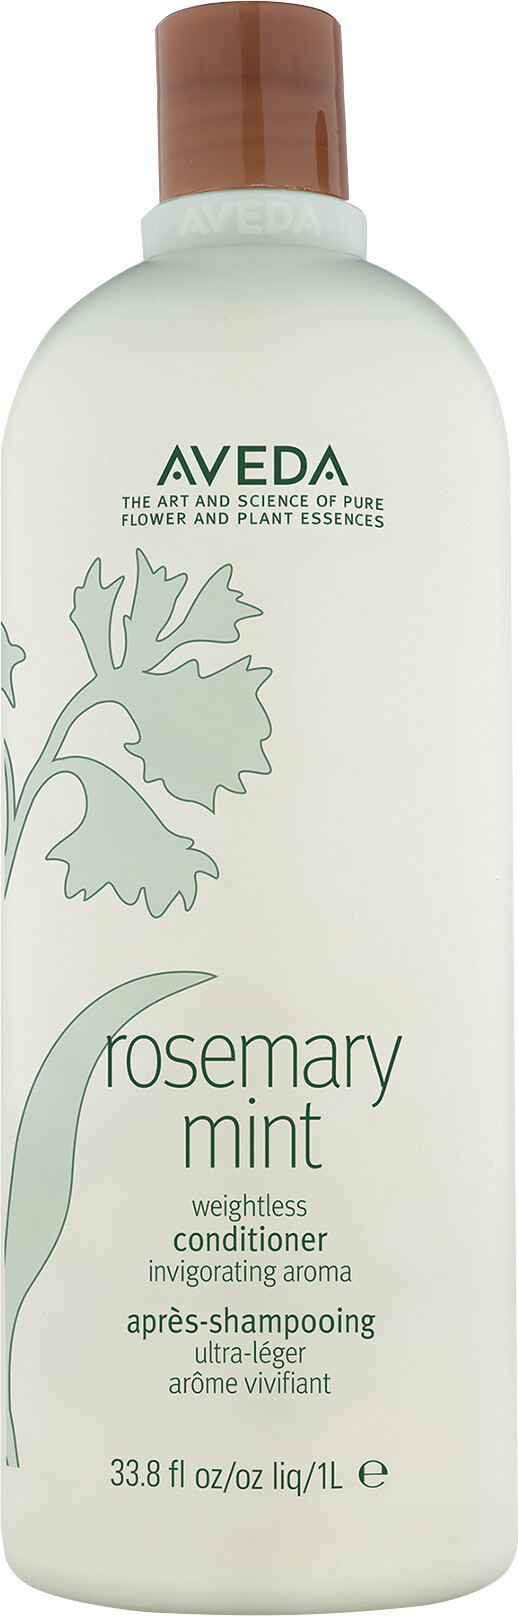 Aveda Rosemary Mint Weightless Conditioner 1 litre